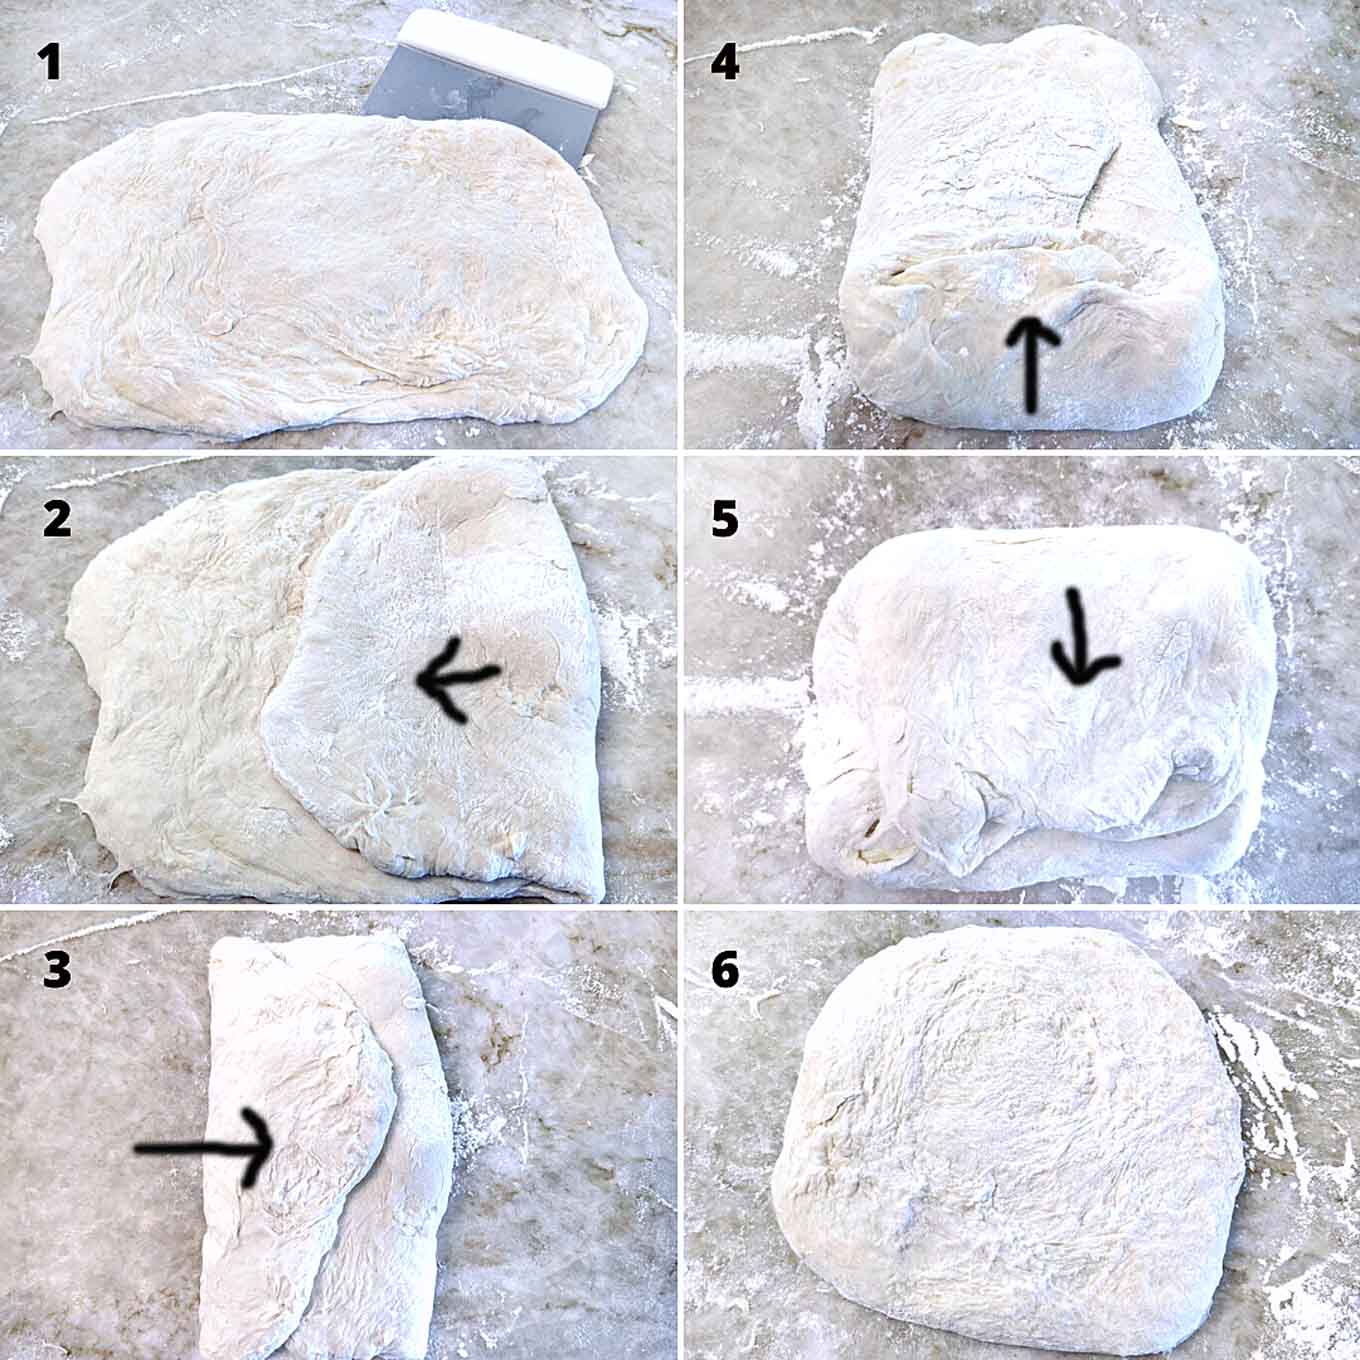 6 step by step pictures showing the process of folding the bread dough